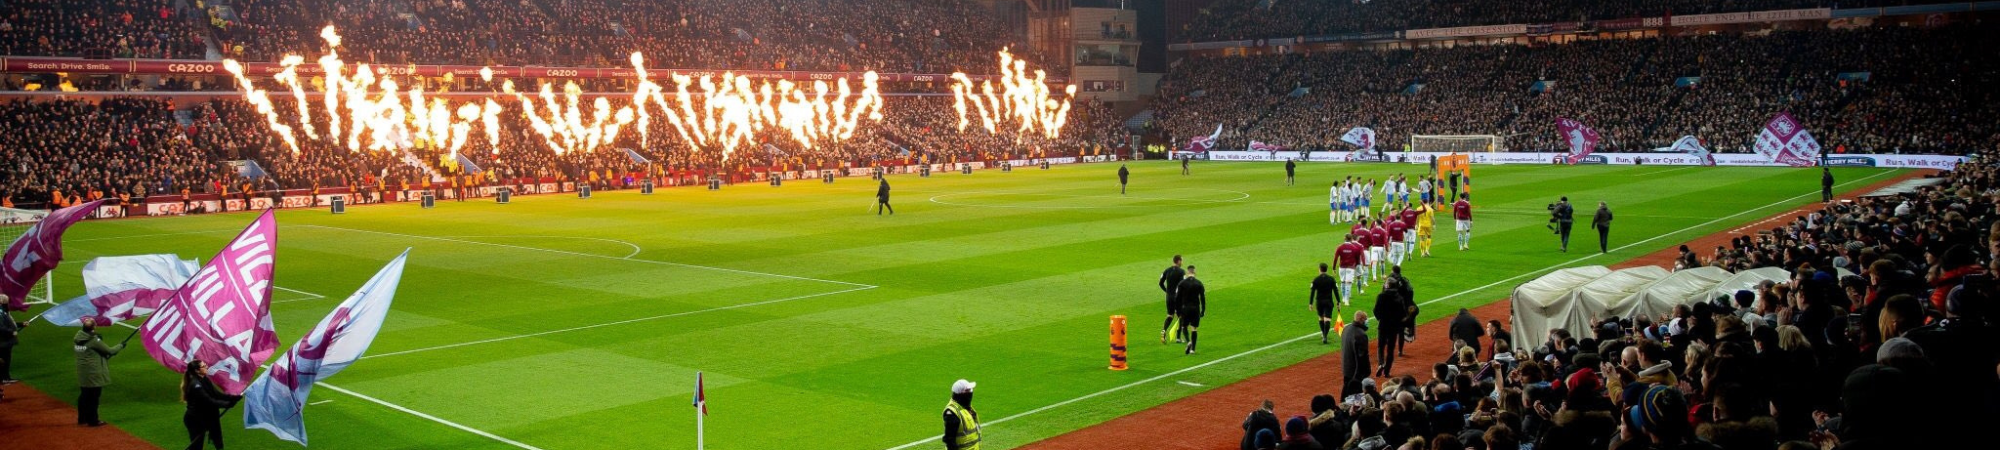 Team Walking Out on Pitch with Fireworks and Flags 